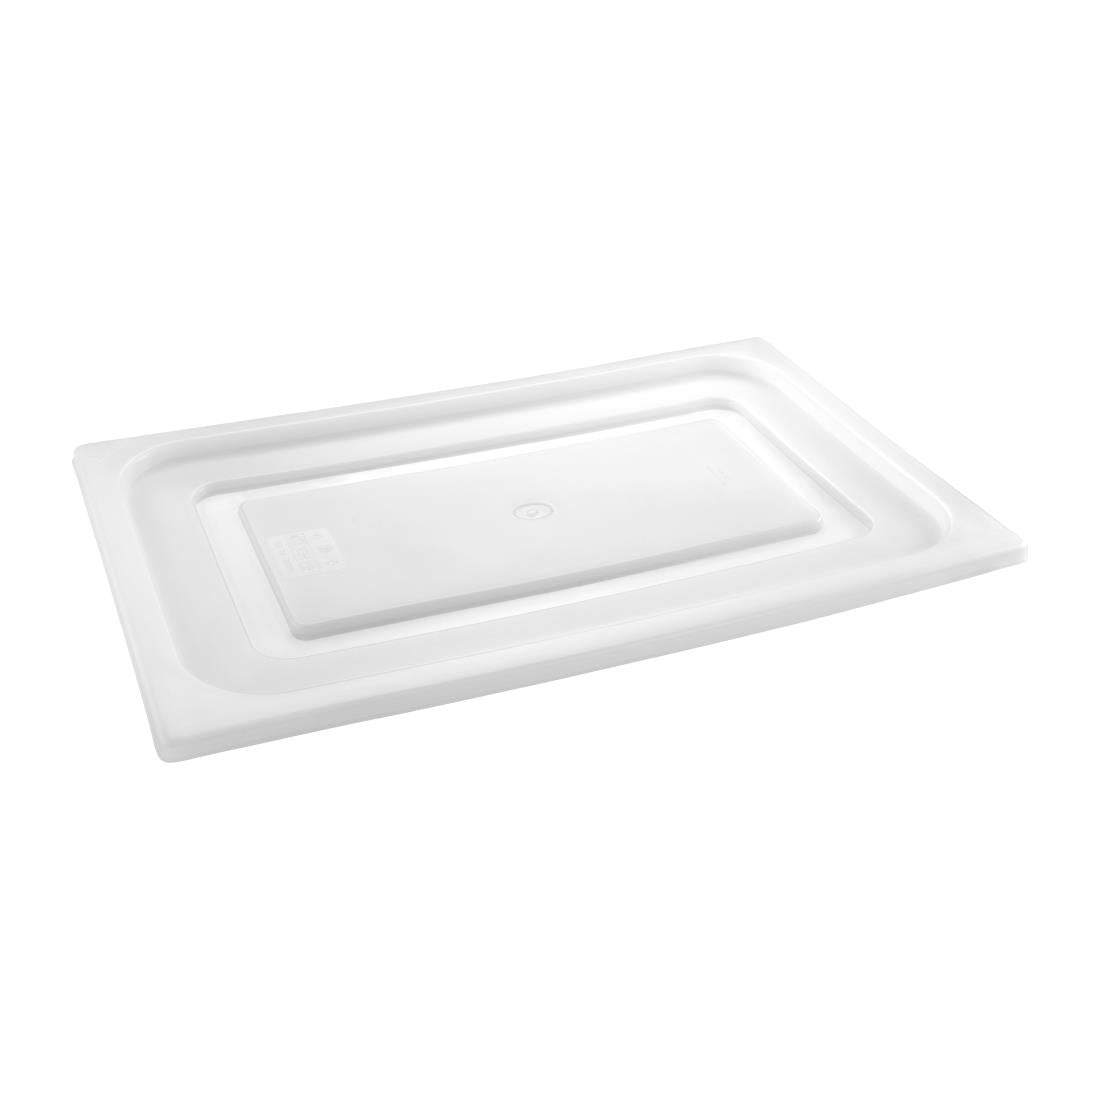 HT880 Pujadas Clear Polinorm Gastronorm Lid 1/3GN